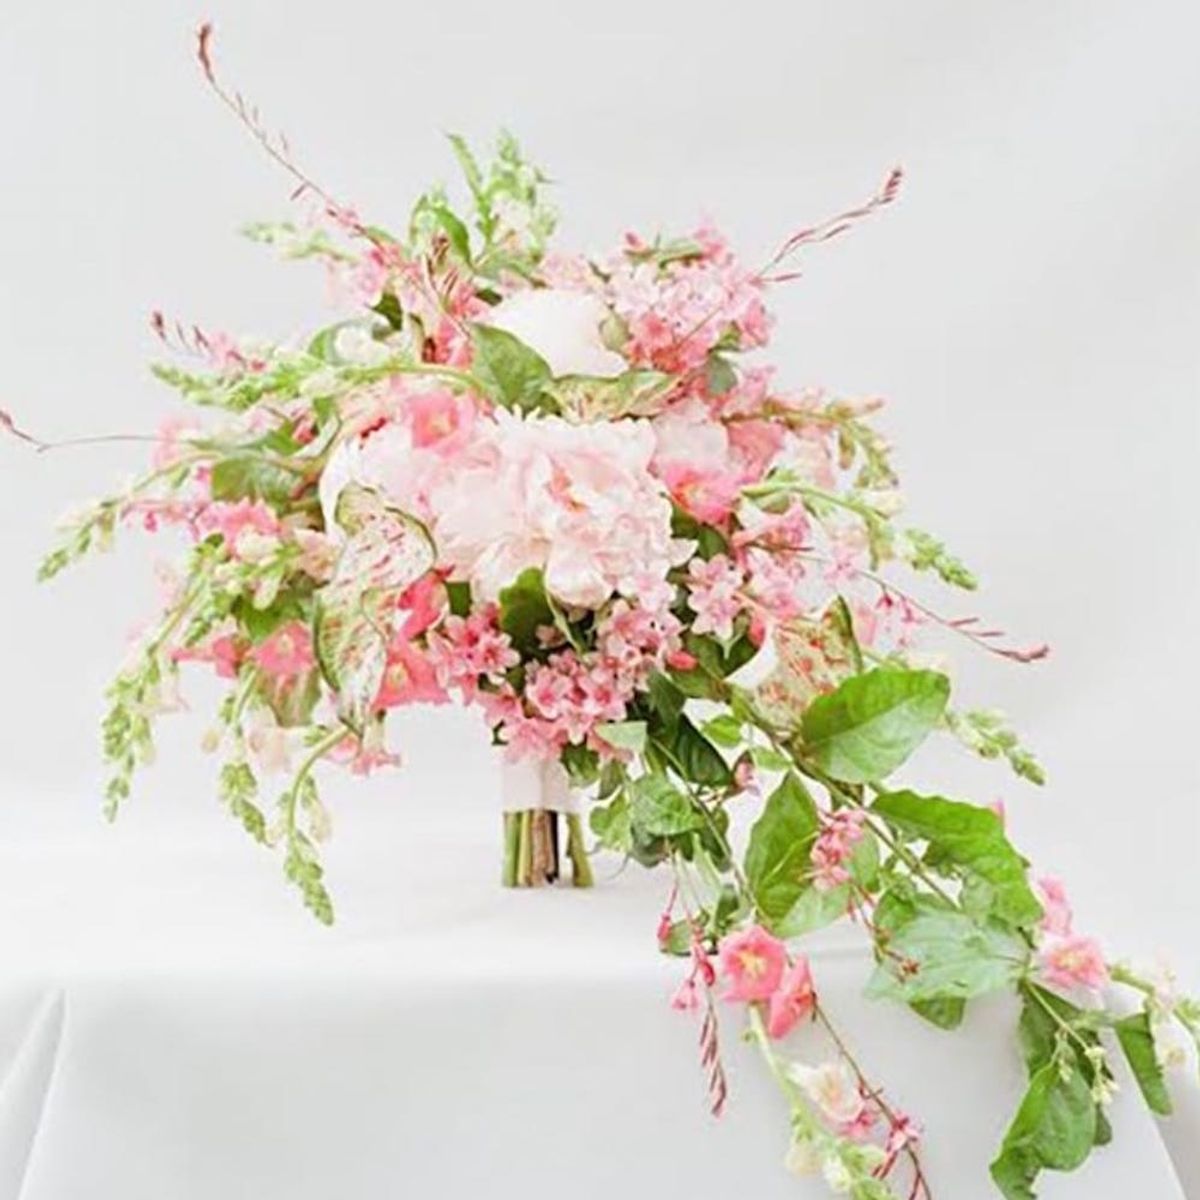 How to Pick the Best Blooms for a Spring Wedding